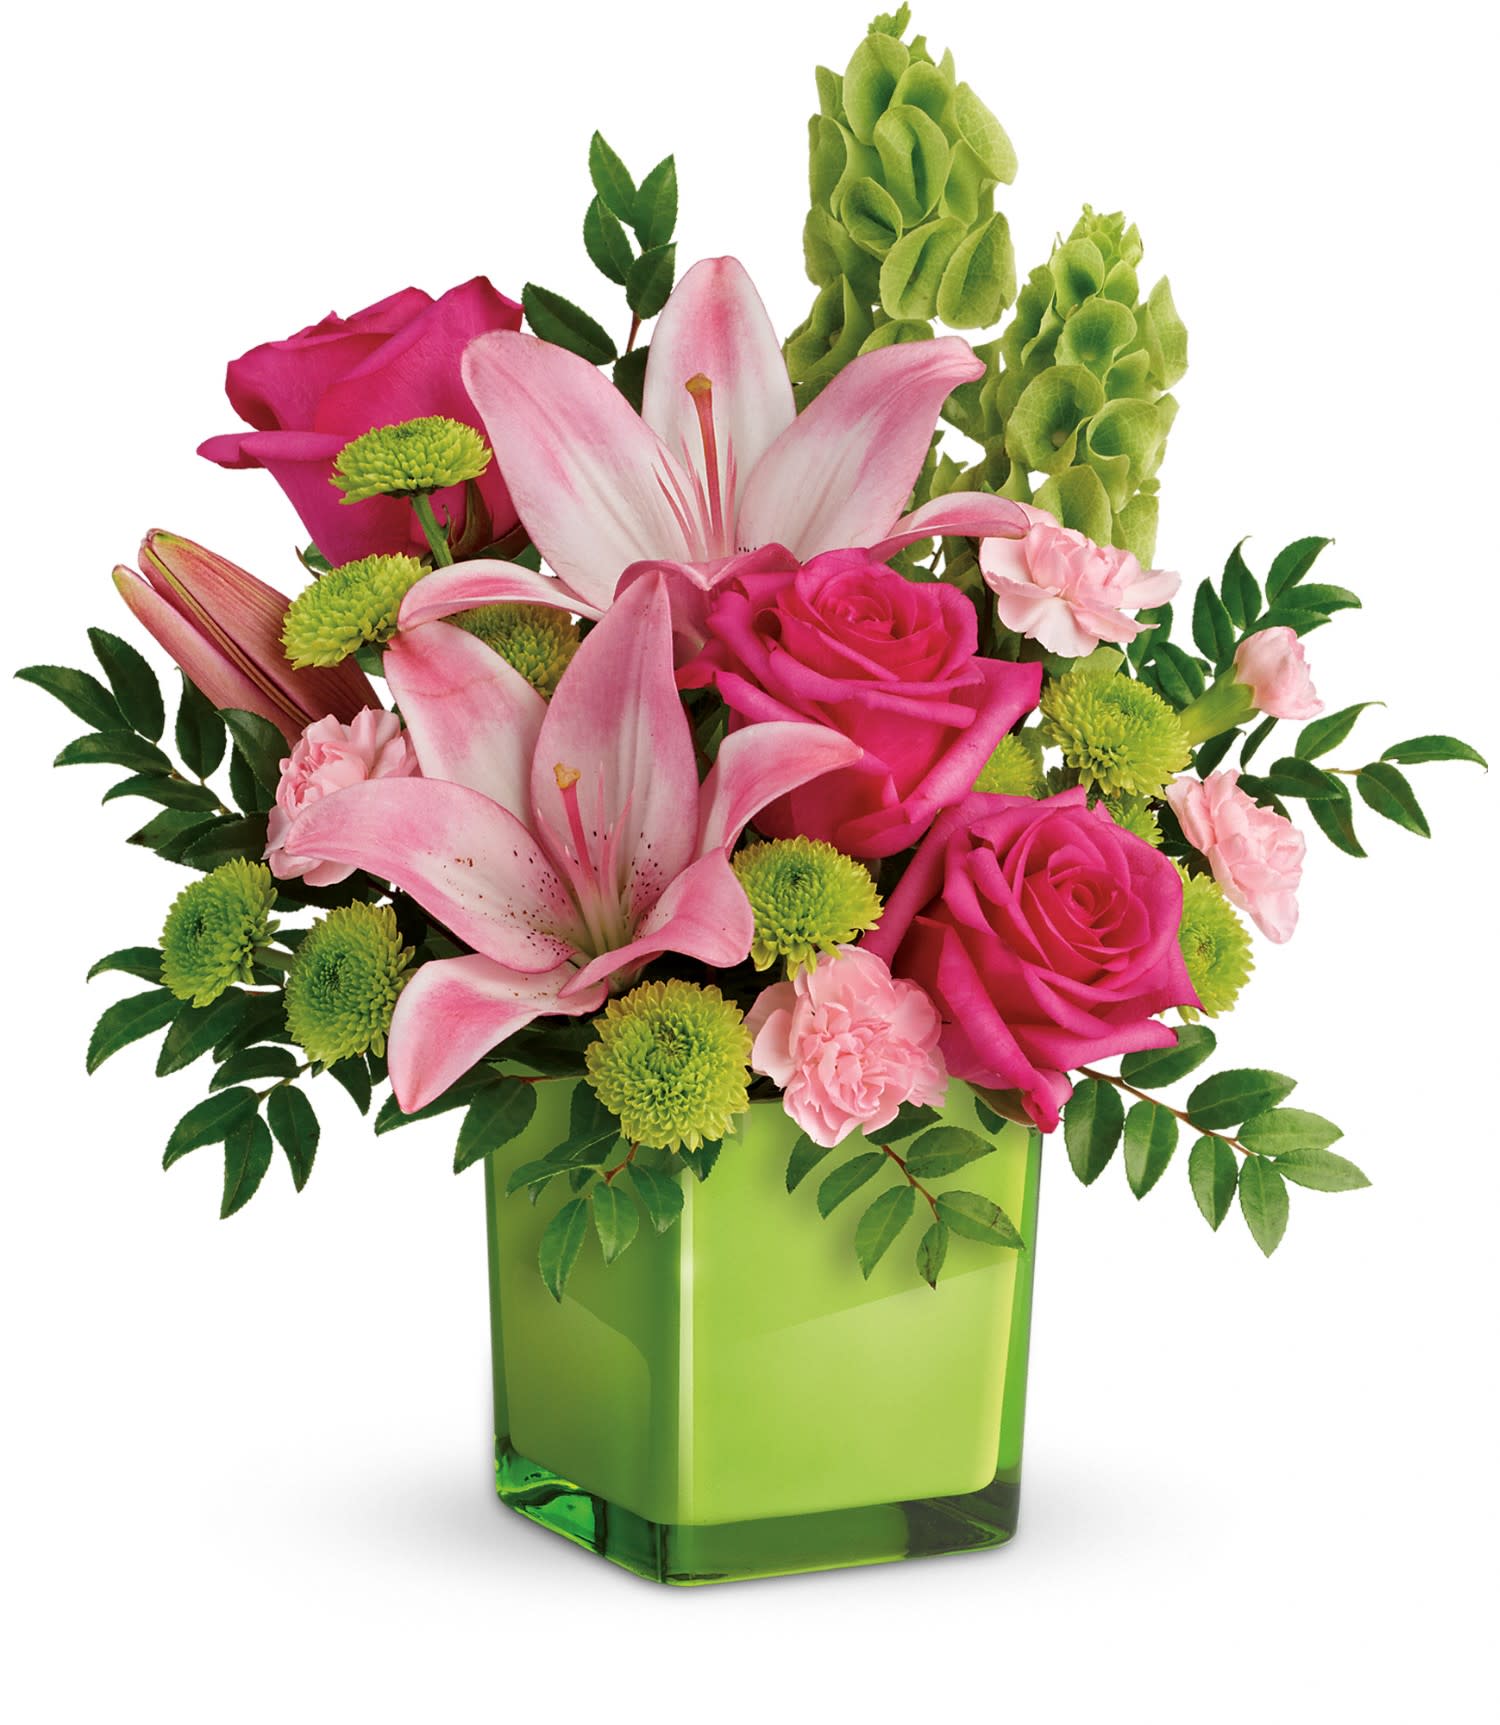 Teleflora's In Love With Lime Bouquet - This refreshing arrangement features dark pink roses, pink asiatic lilies, pink miniature carnations, bells of ireland, green button spray chrysanthemums, and huckleberry. Delivered in a glass cube. Approximately 14 W x 15 H